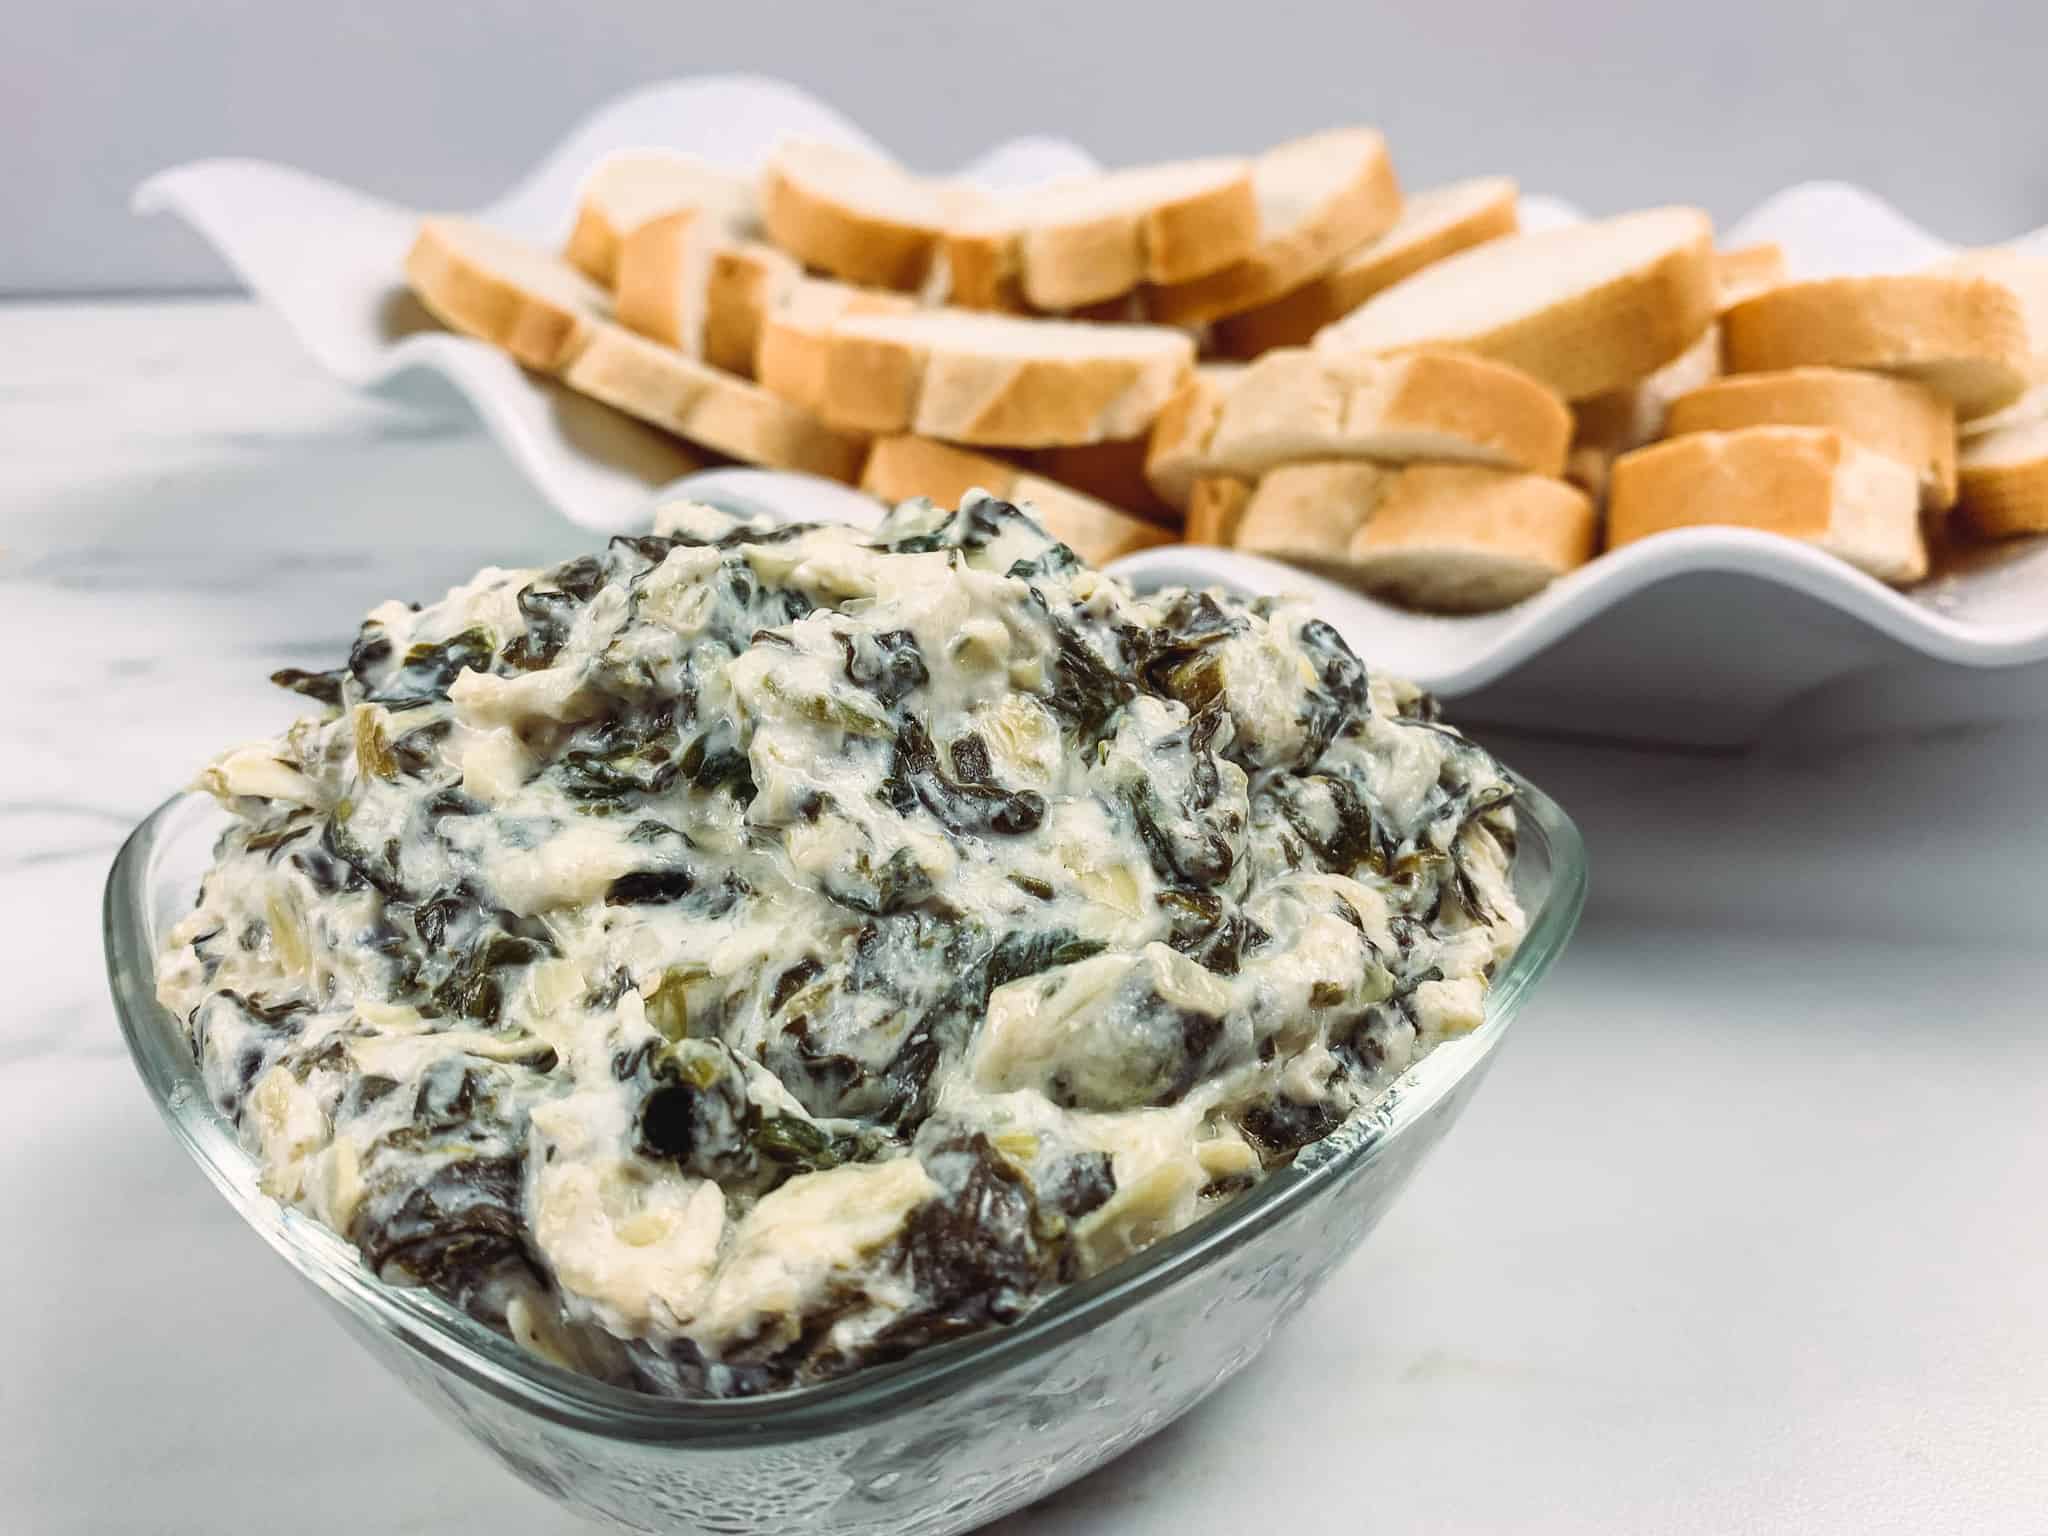 The easiest and most delicious spinach and artichoke dip